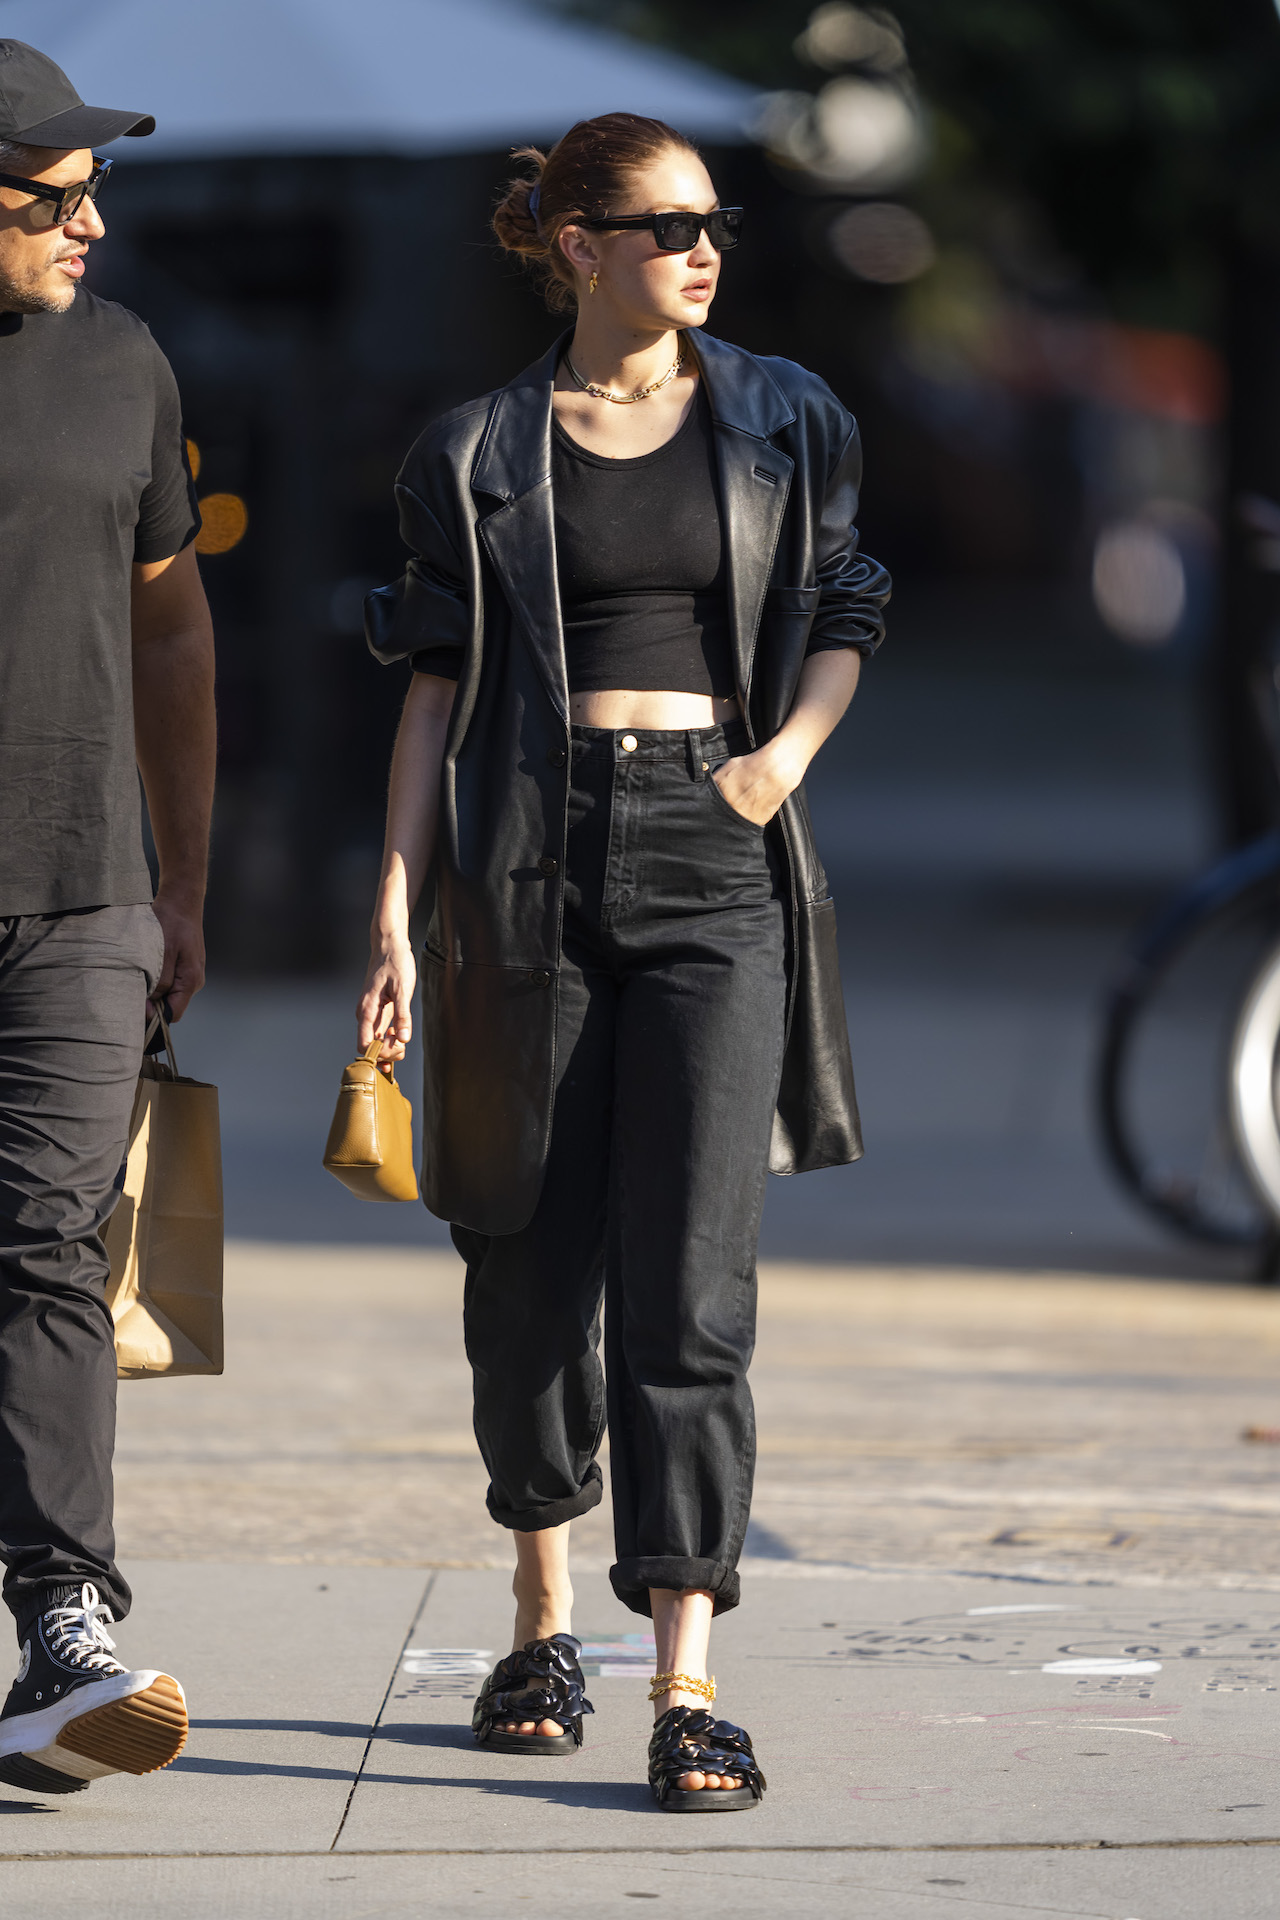 Gigi Hadid's Best Outfits of 2021